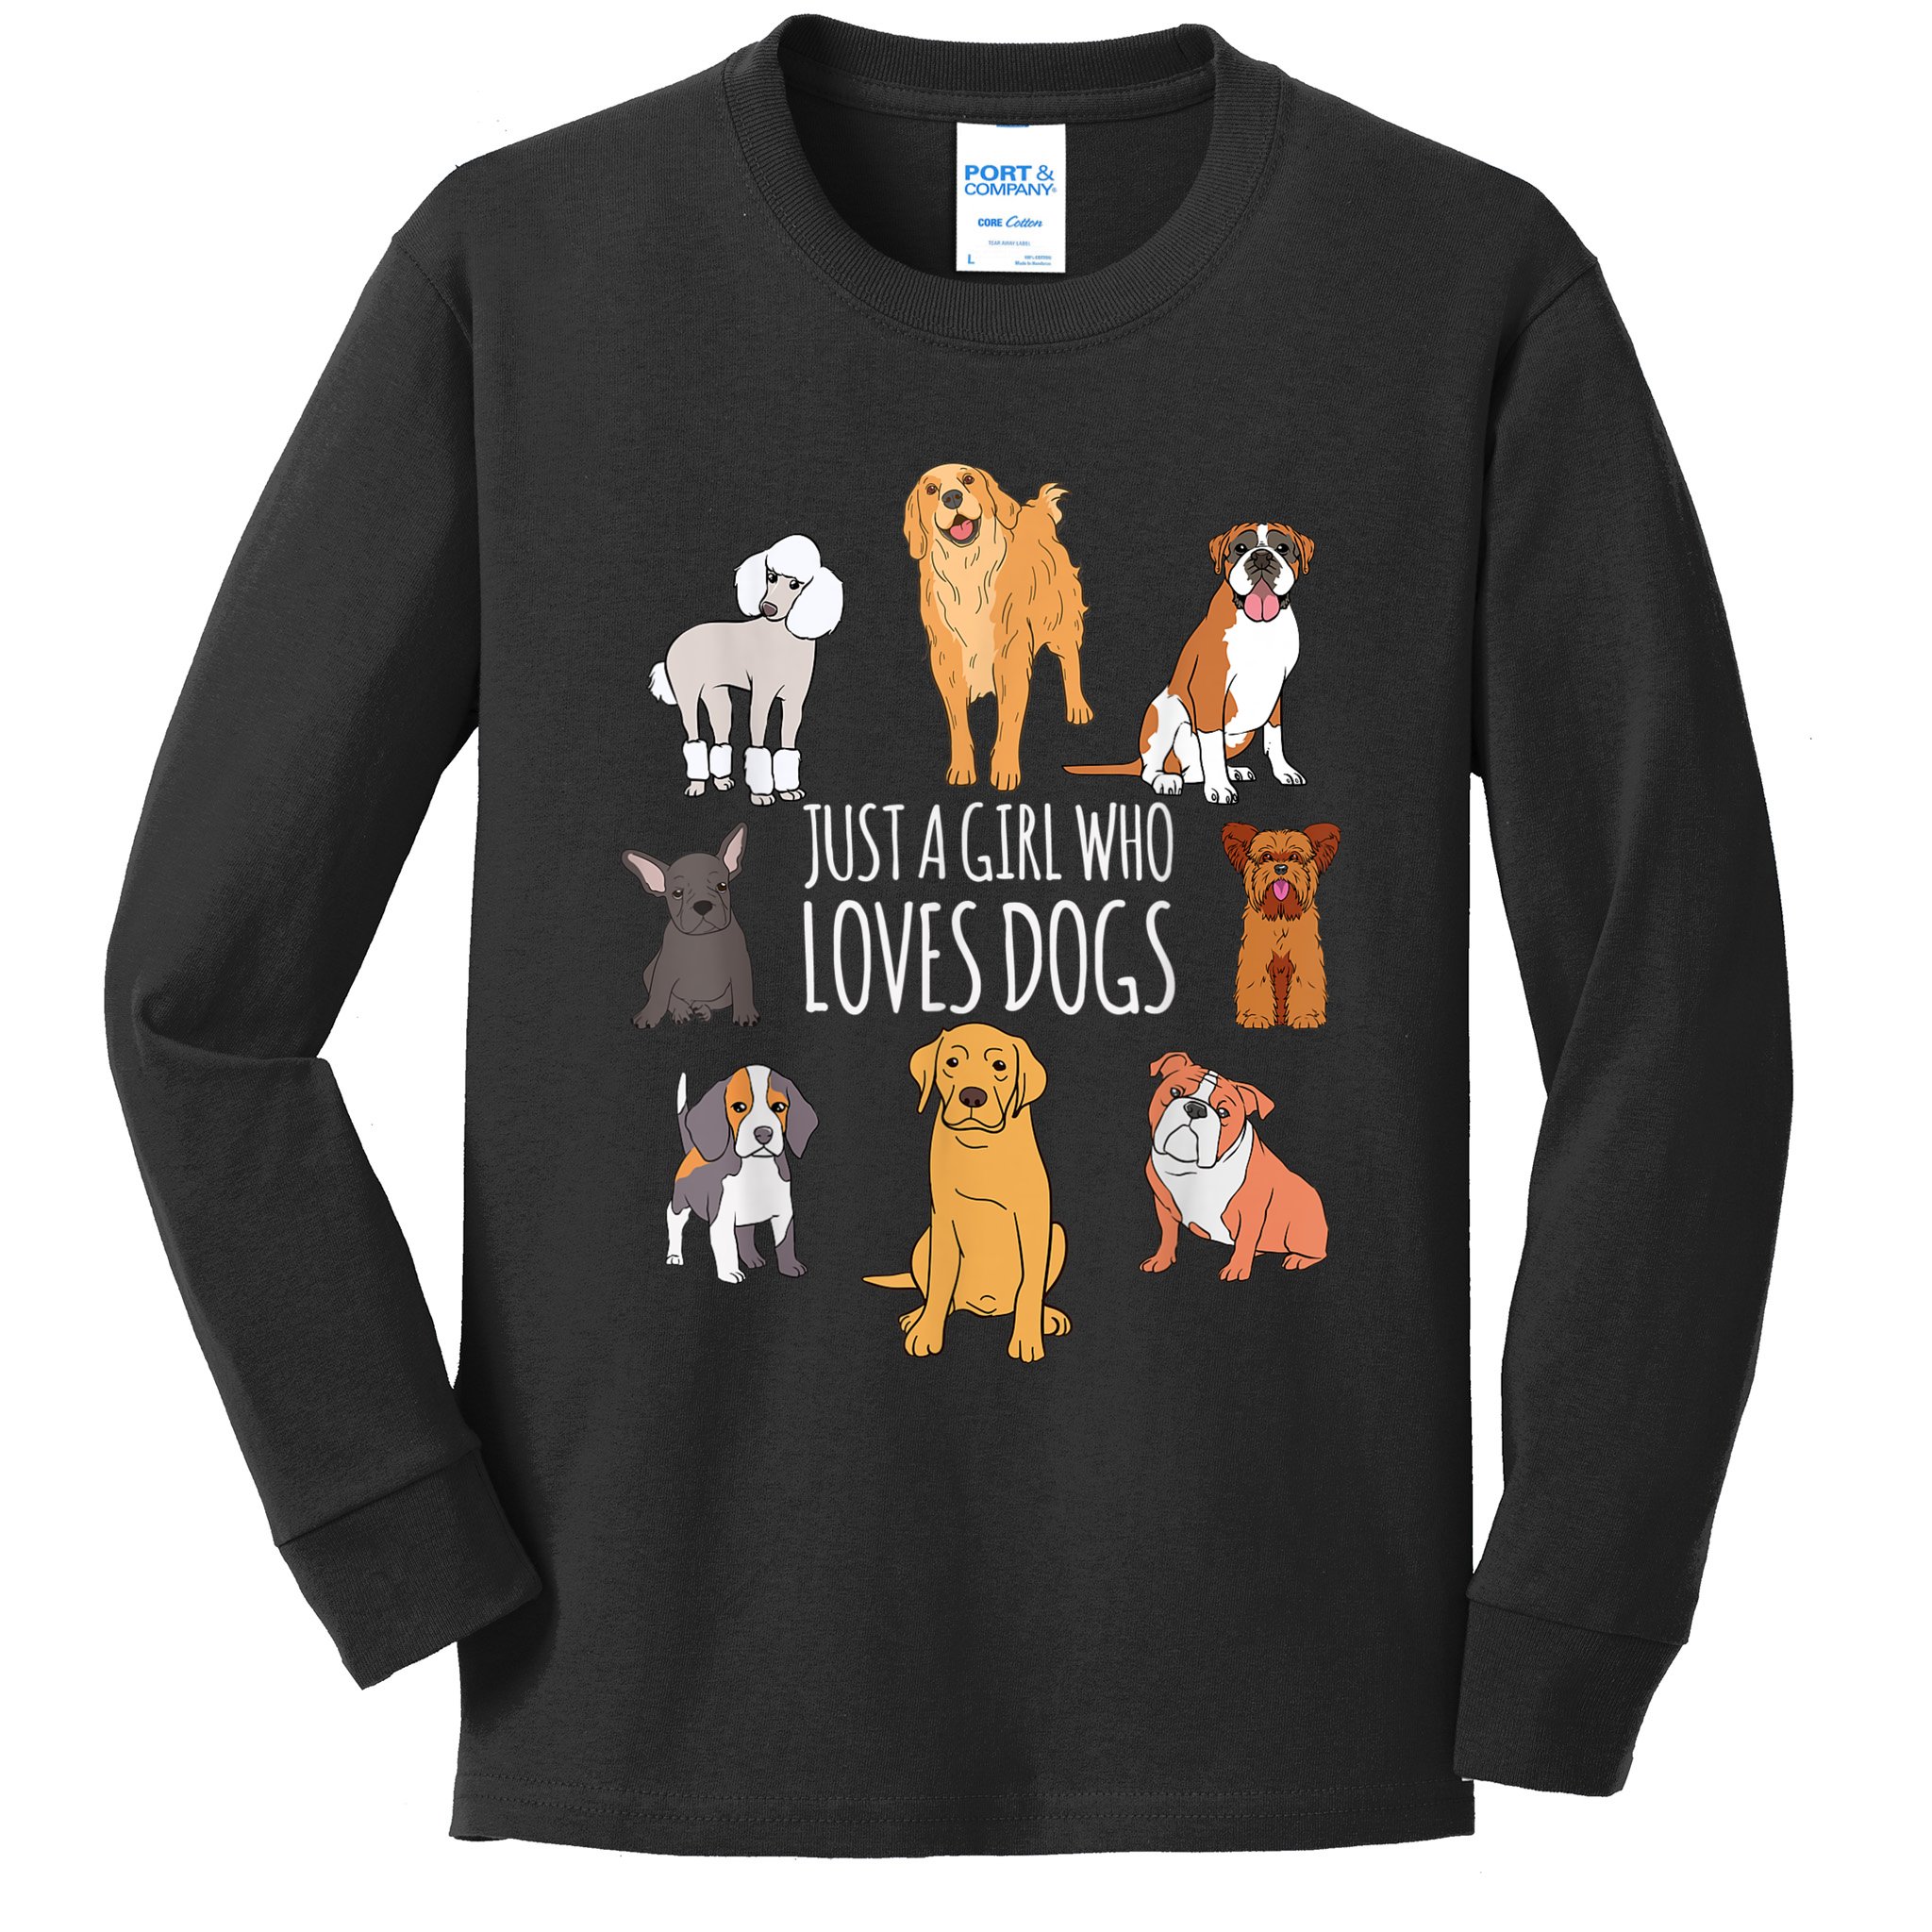 https://images3.teeshirtpalace.com/images/productImages/cdp9079755-cute-dog--puppy-lover-gift--fun-just-a-girl-who-loves-dogs--black-ylt-garment.jpg